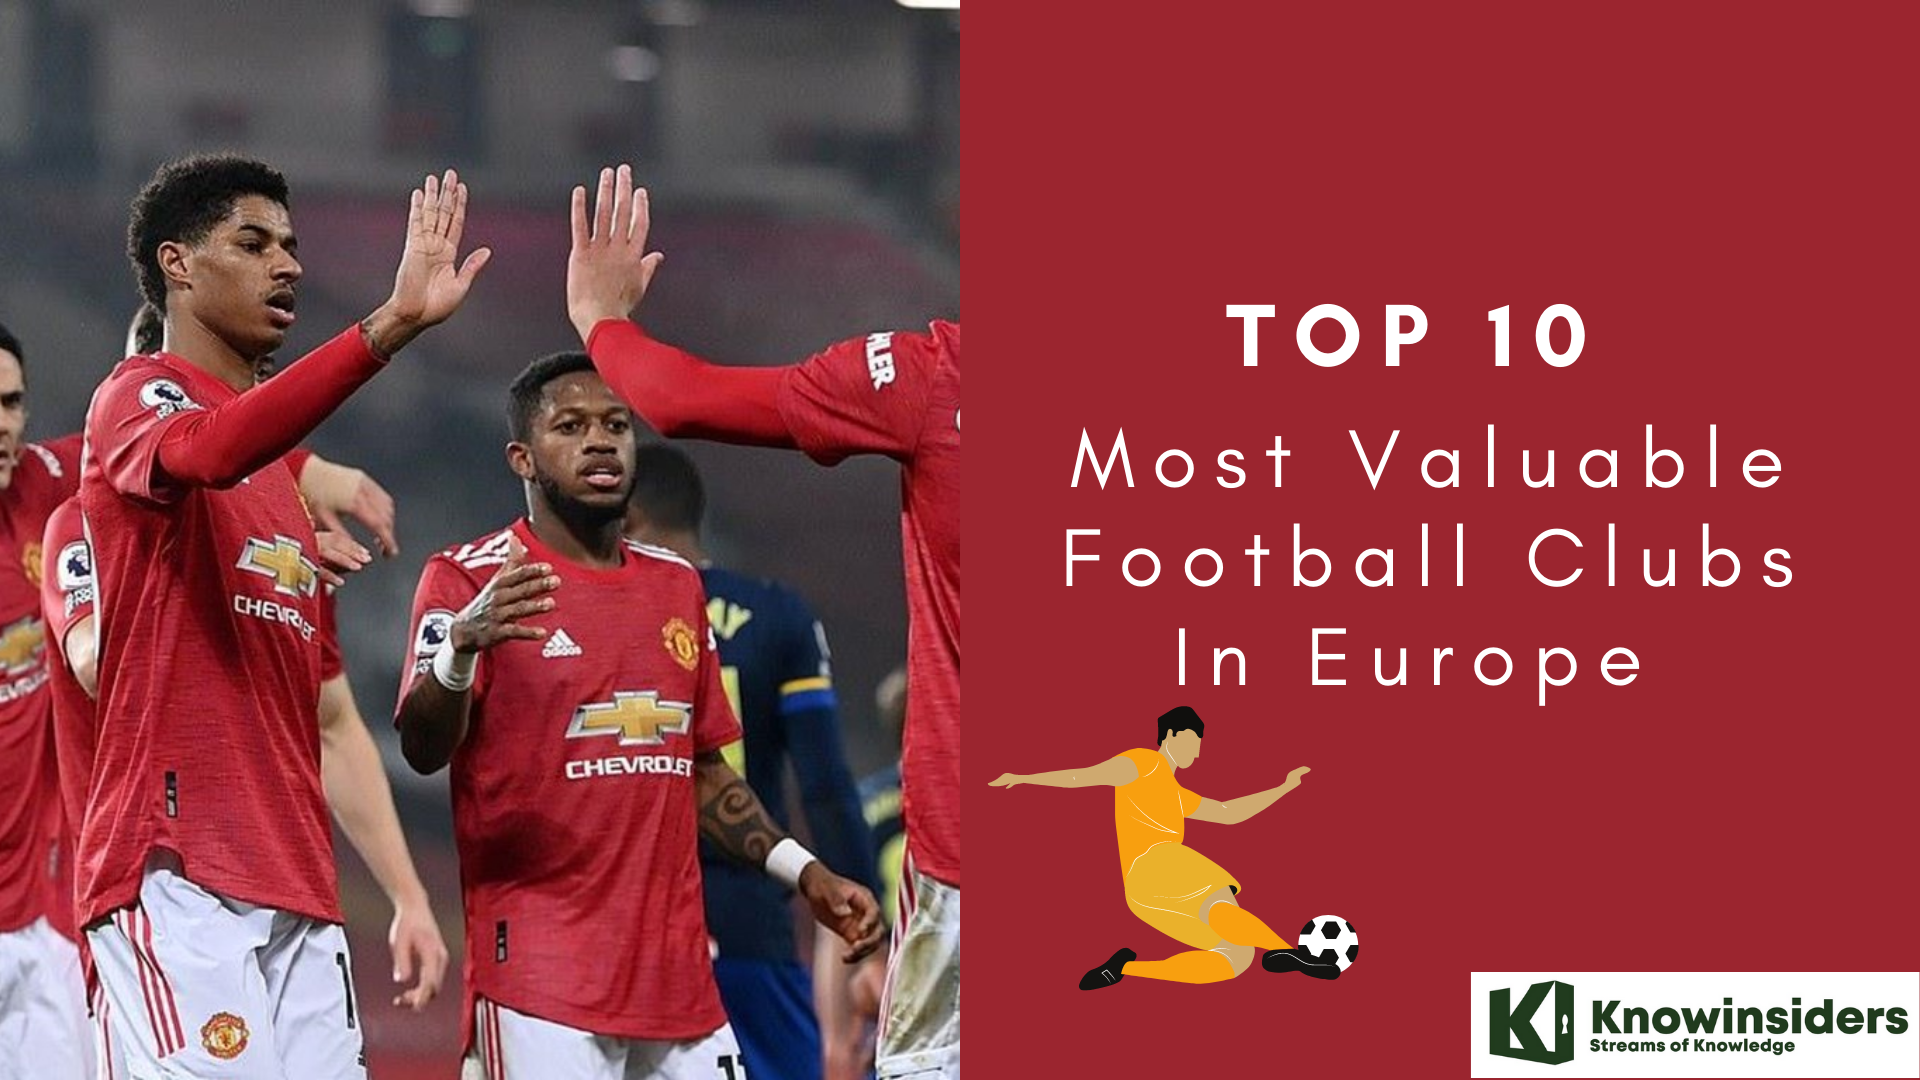 Top 10 most valuable football clubs in Europe 